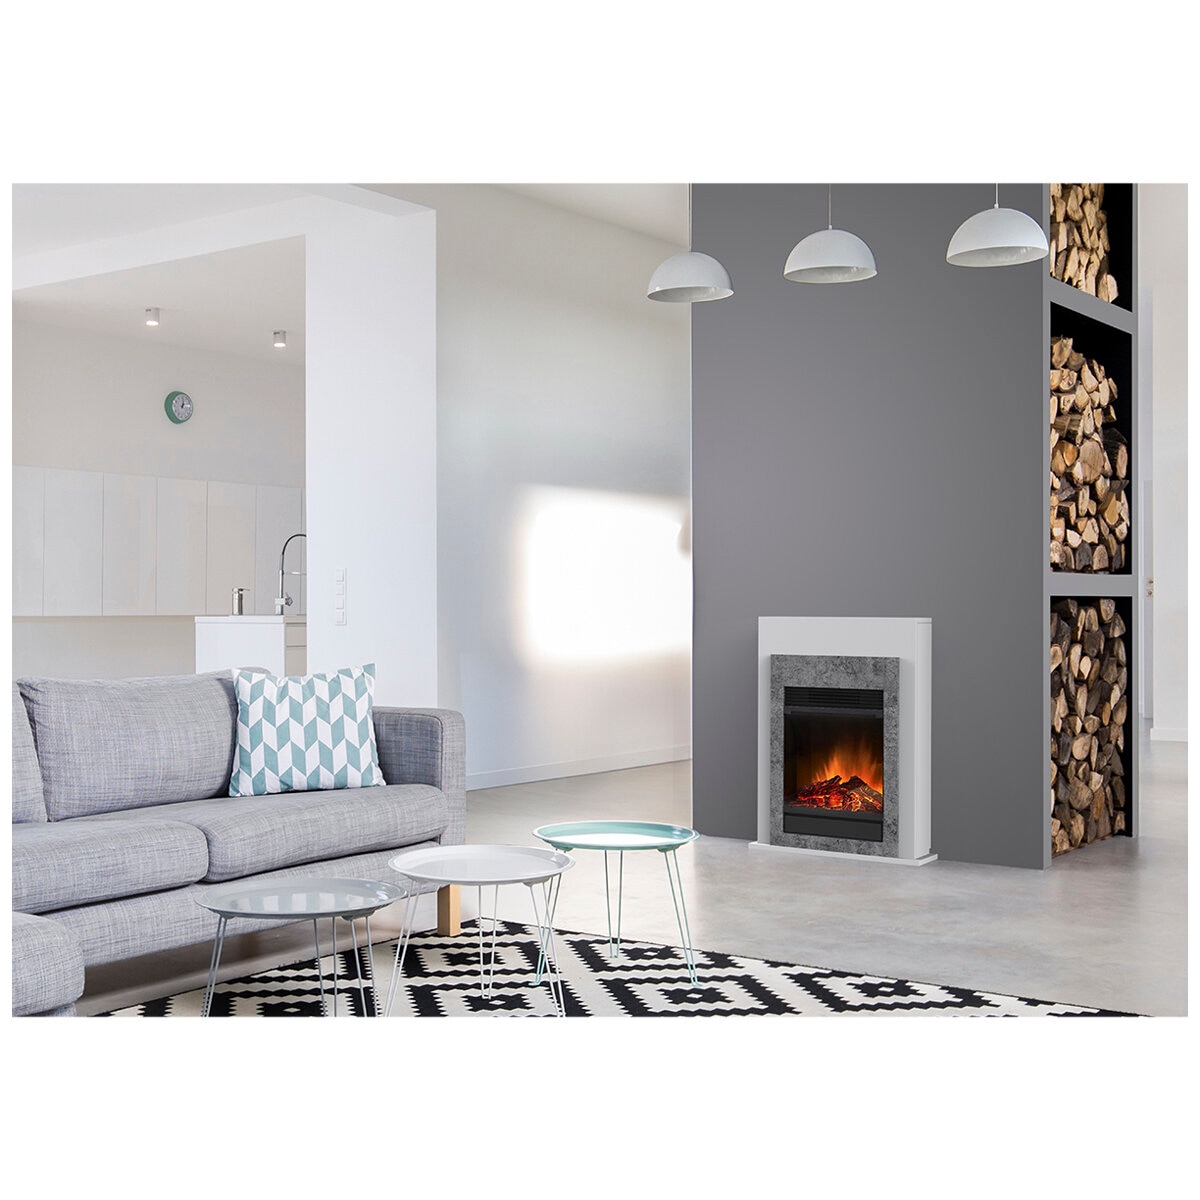 Dimplex 1.5 kW Conner Mini Suite with LED Firebox Grey & White